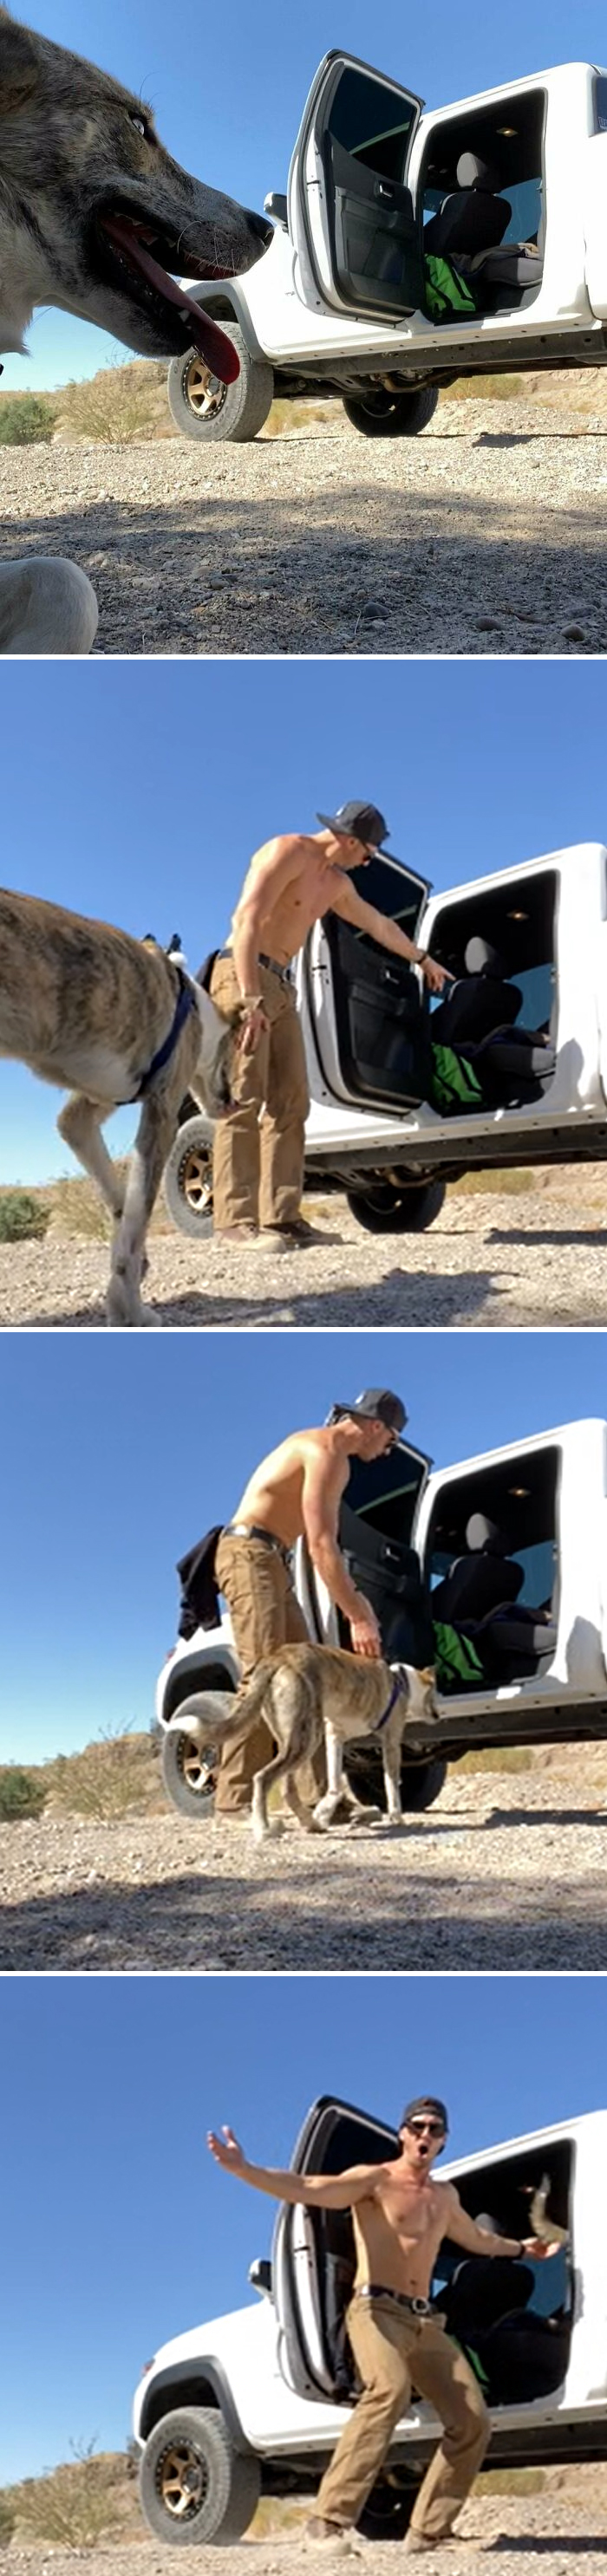 I Recently Rescued Dudeson, He Hated Getting Into My Truck. Figured Out He’s A Visual Learner